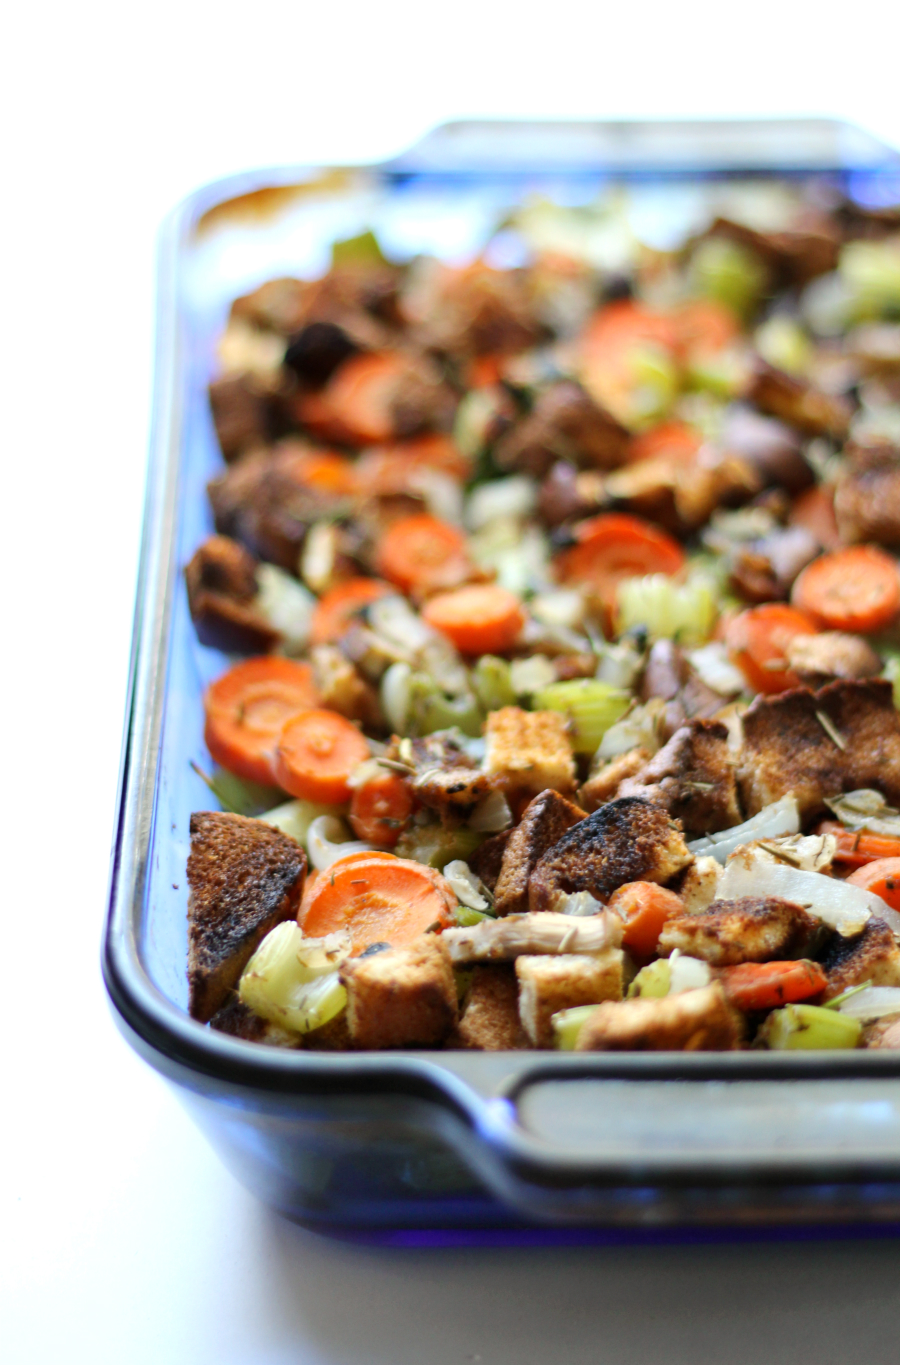 The Best Gluten-Free Vegan Stuffing | Strength and Sunshine @RebeccaGF666 Thanksgiving is never complete without some of The Best Gluten-Free Vegan Stuffing! Impress your guests with this essential side dish recipe that's safe for all food allergies, loved by all, and may just become the new star of the show!